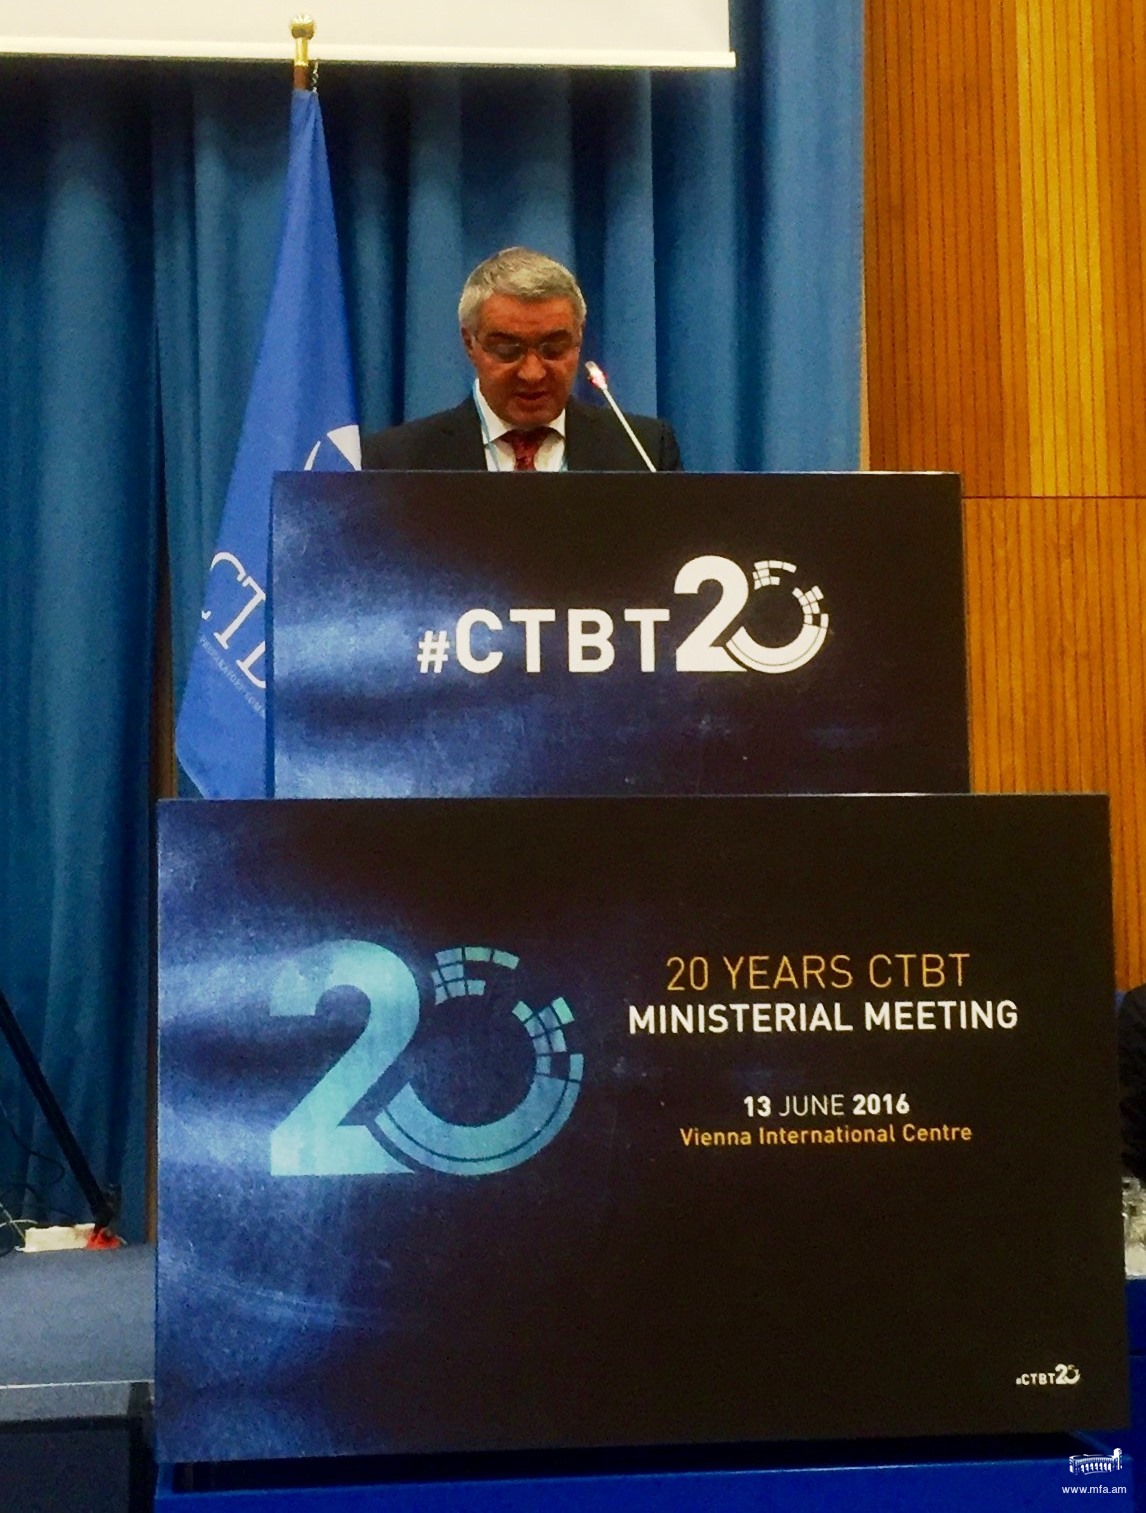 Deputy FM Hovakimian delivered speech at the Ministerial Meeting commemorating the 20th Anniversary of the Comprehensive Nuclear-Test-Ban Treaty